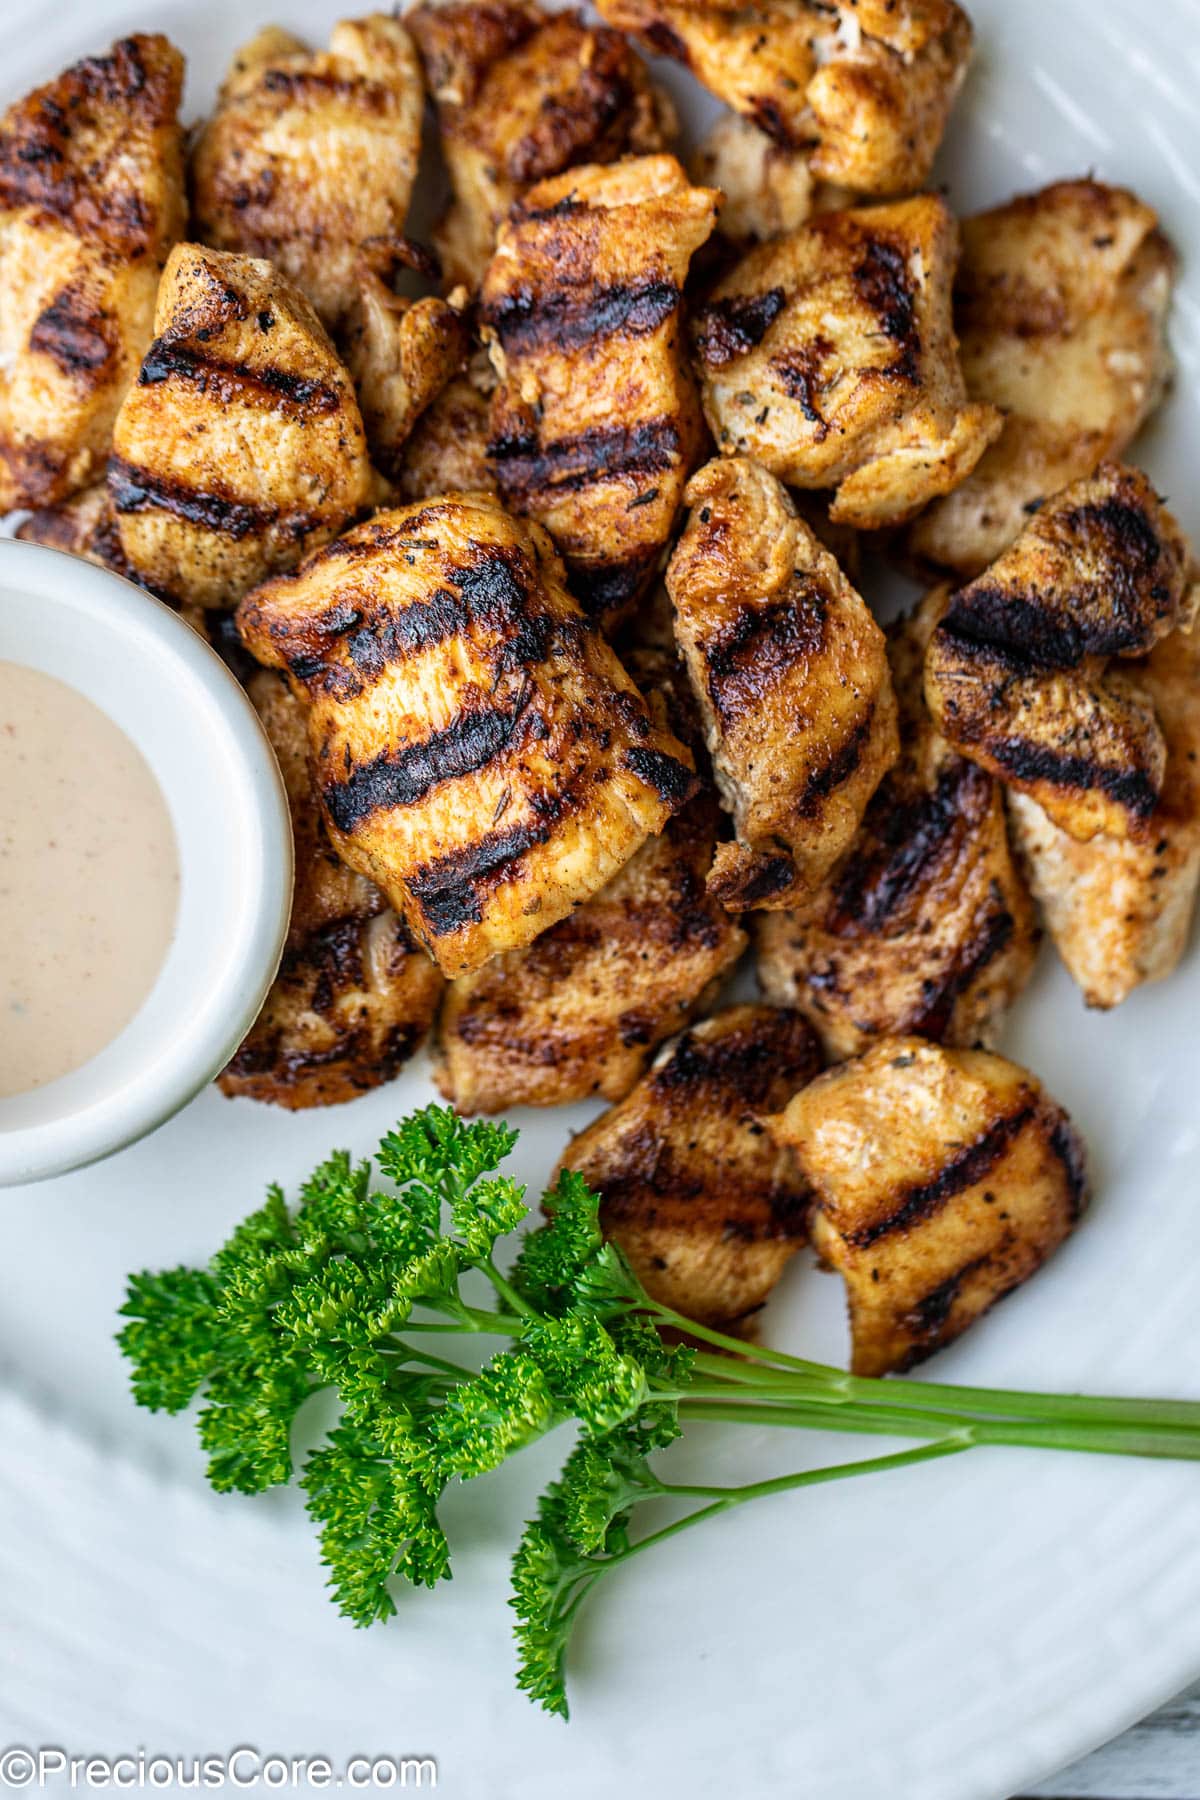 Grilled chicken nuggets with herbs and sauce.